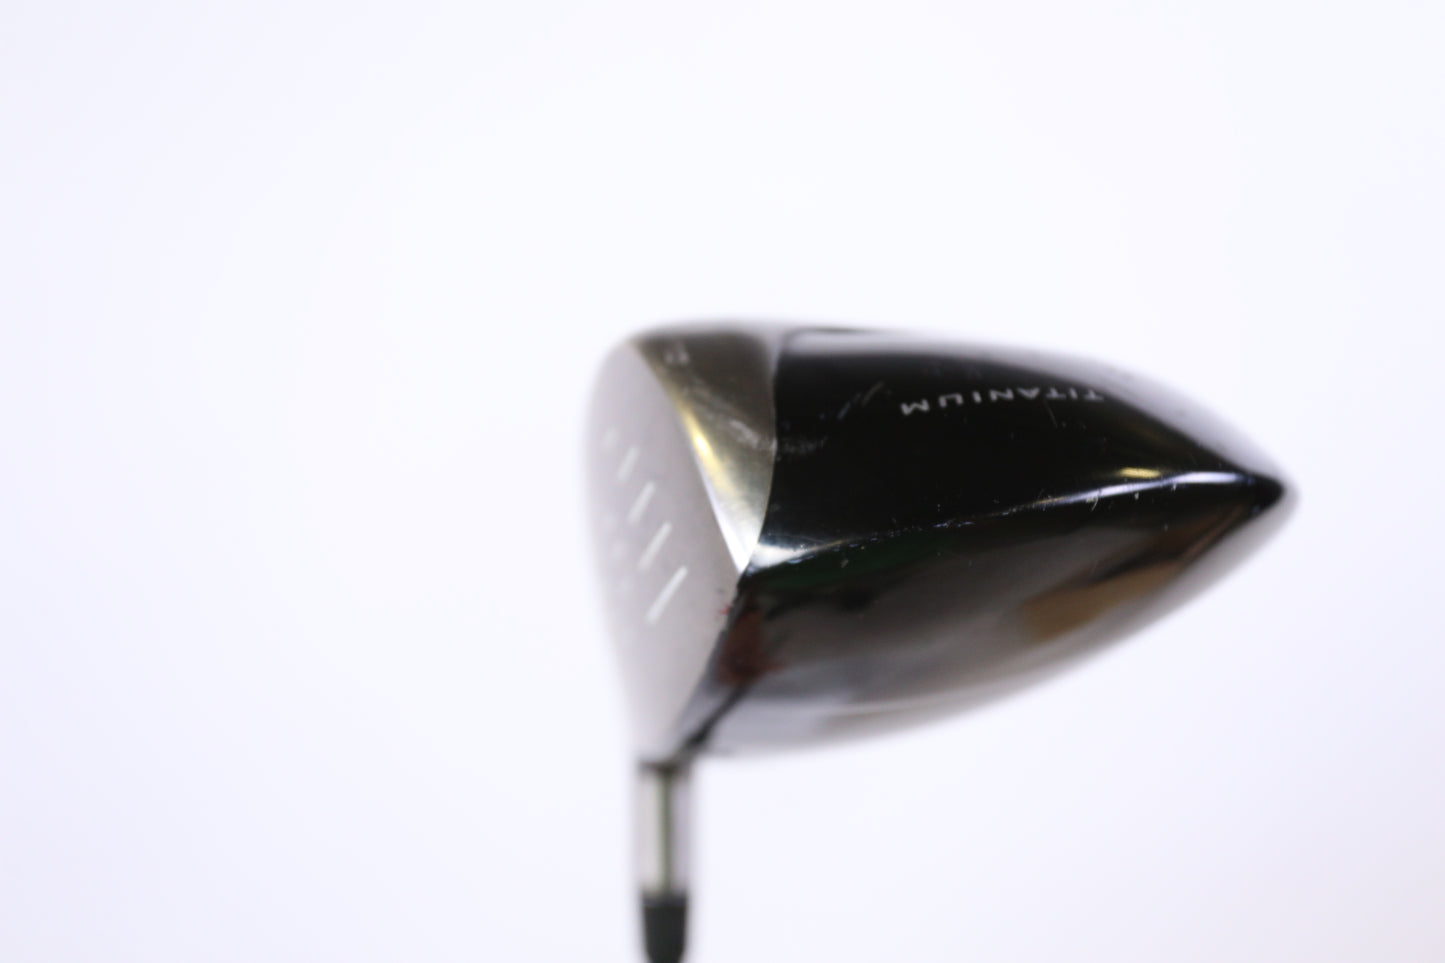 TaylorMade R580 Driver - Right-Handed - 9.5 Degrees - Stiff Flex